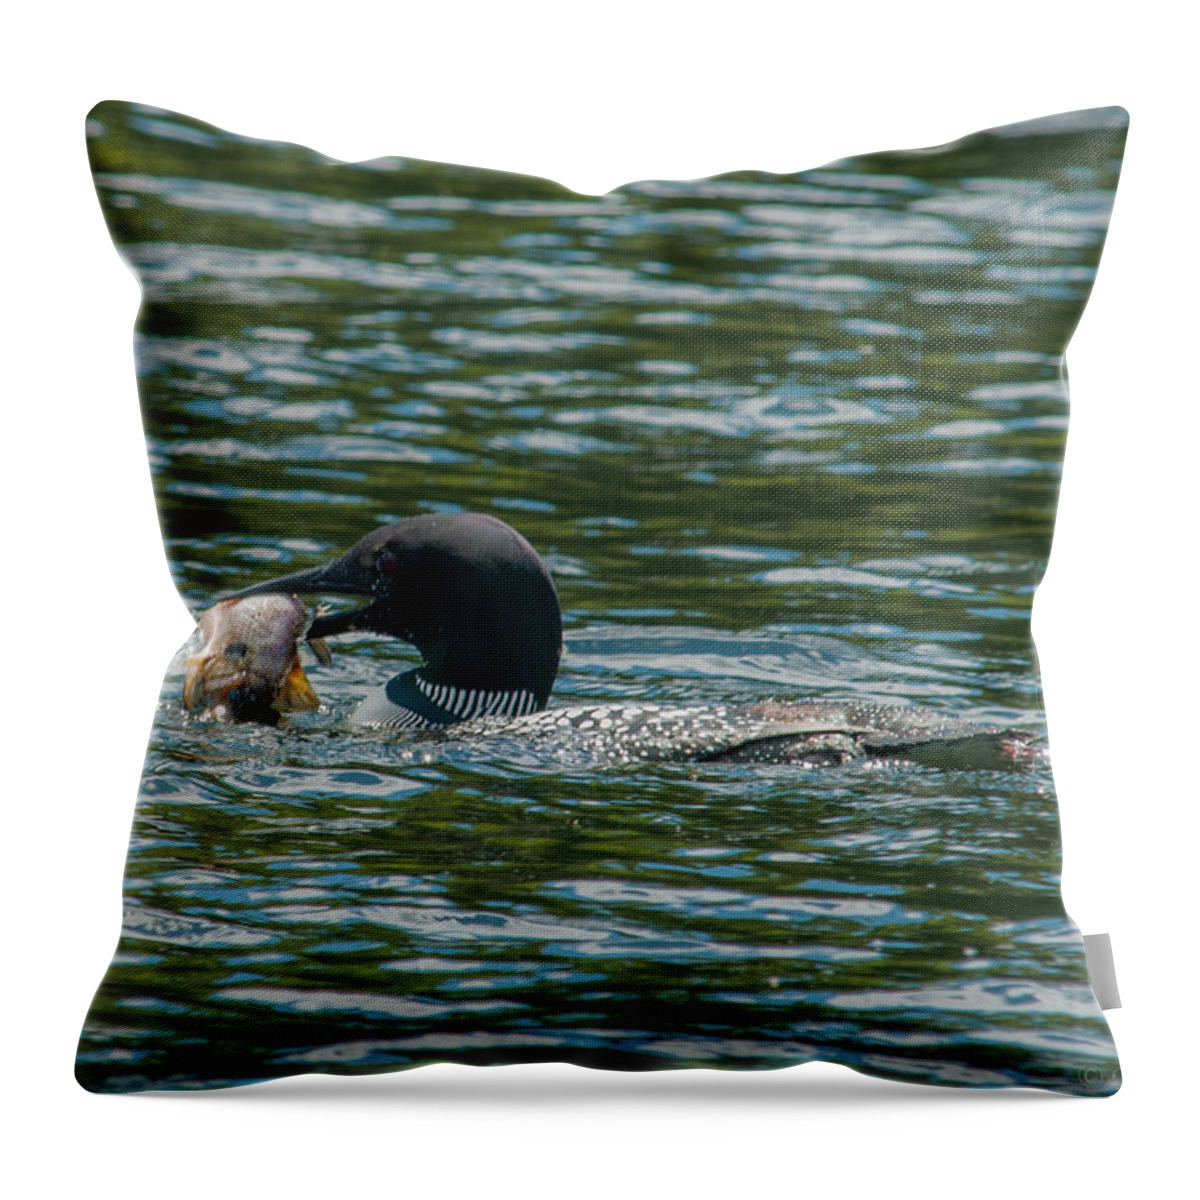 Birds Throw Pillow featuring the photograph Great Catch by Brenda Jacobs